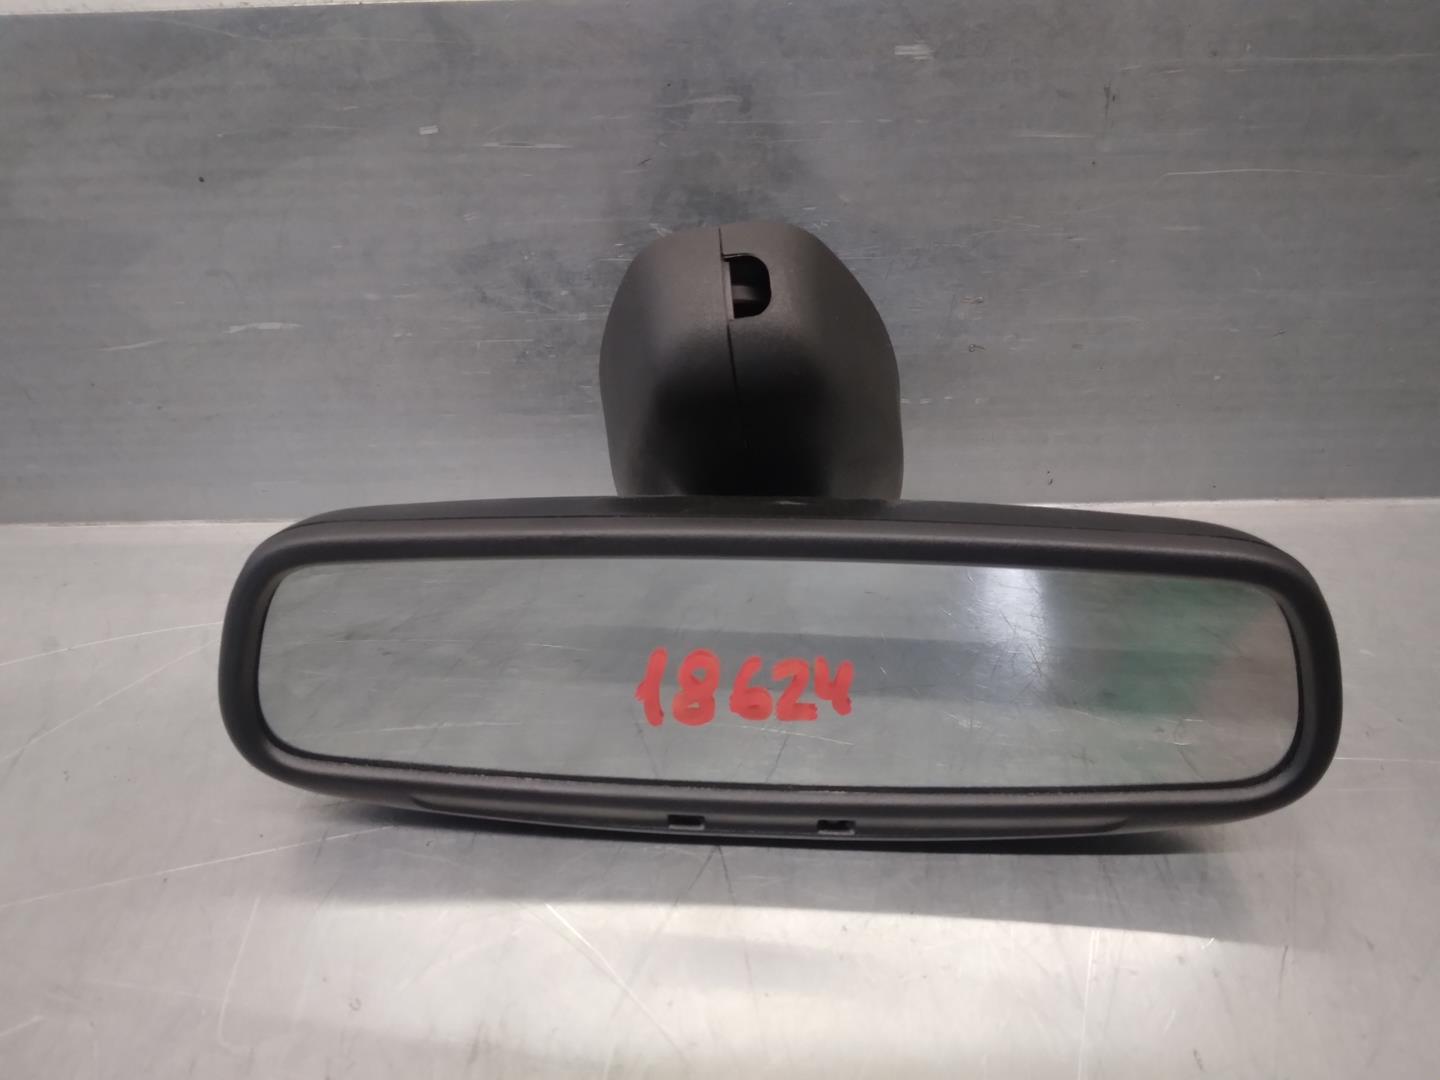 LAND ROVER Discovery 4 generation (2009-2016) Interior Rear View Mirror 8243719 20803306